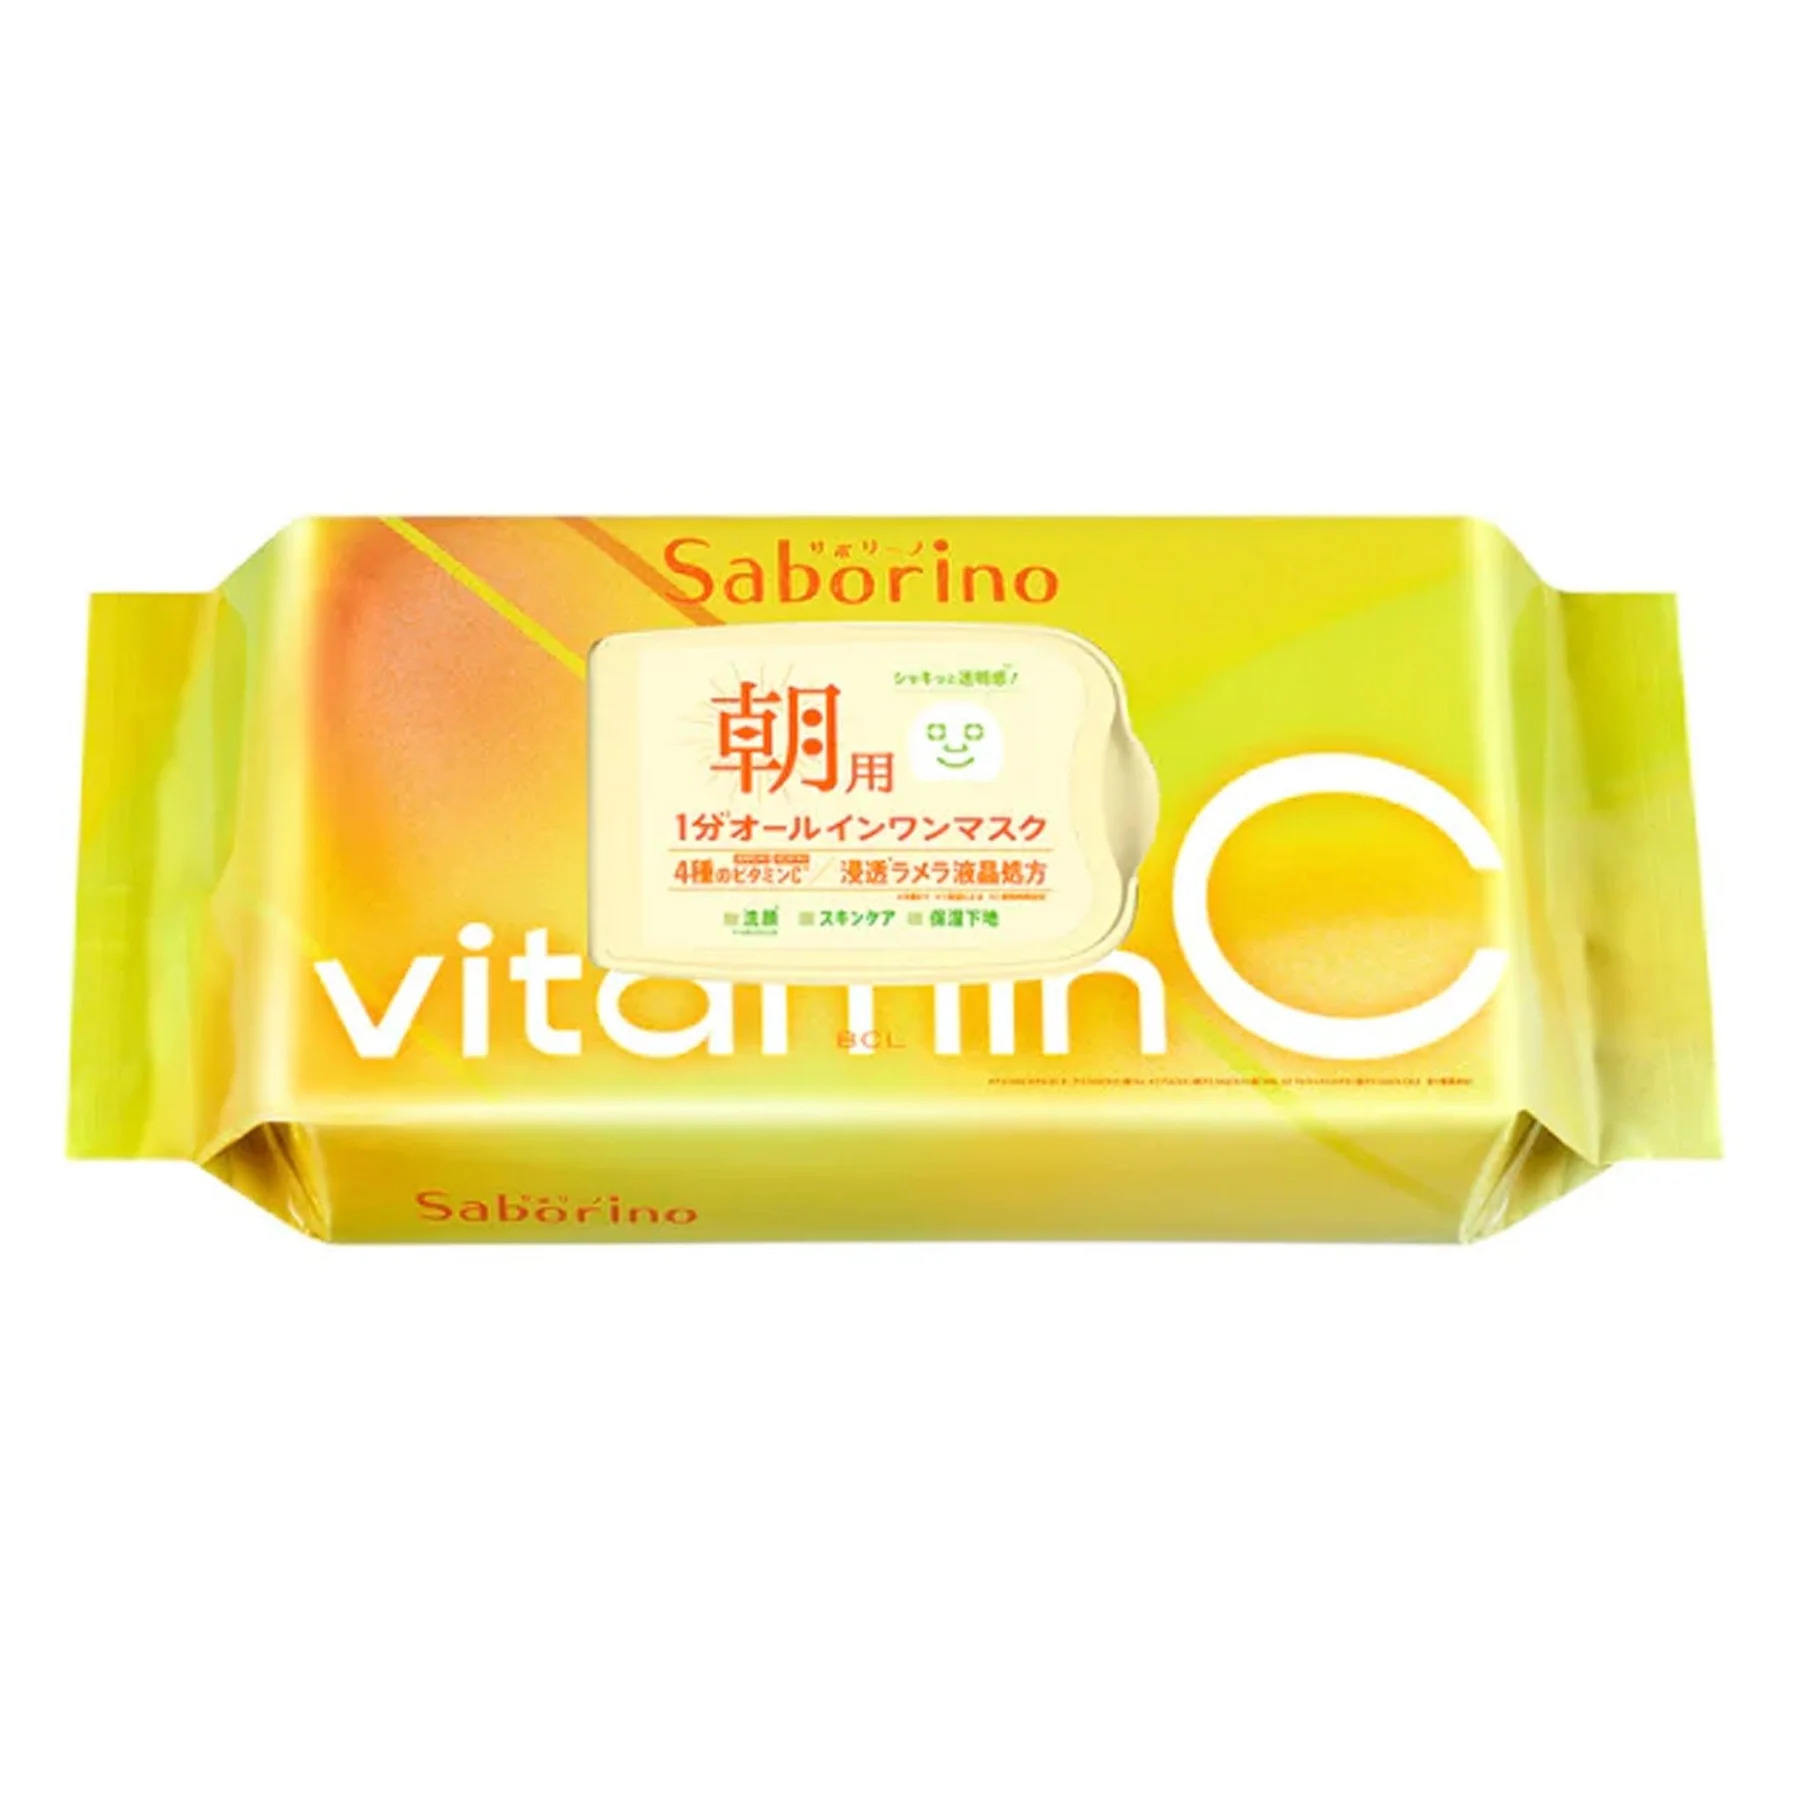 BCL Saborino Morning All-in-One Face Mask 30 Sheets - Vitamin C